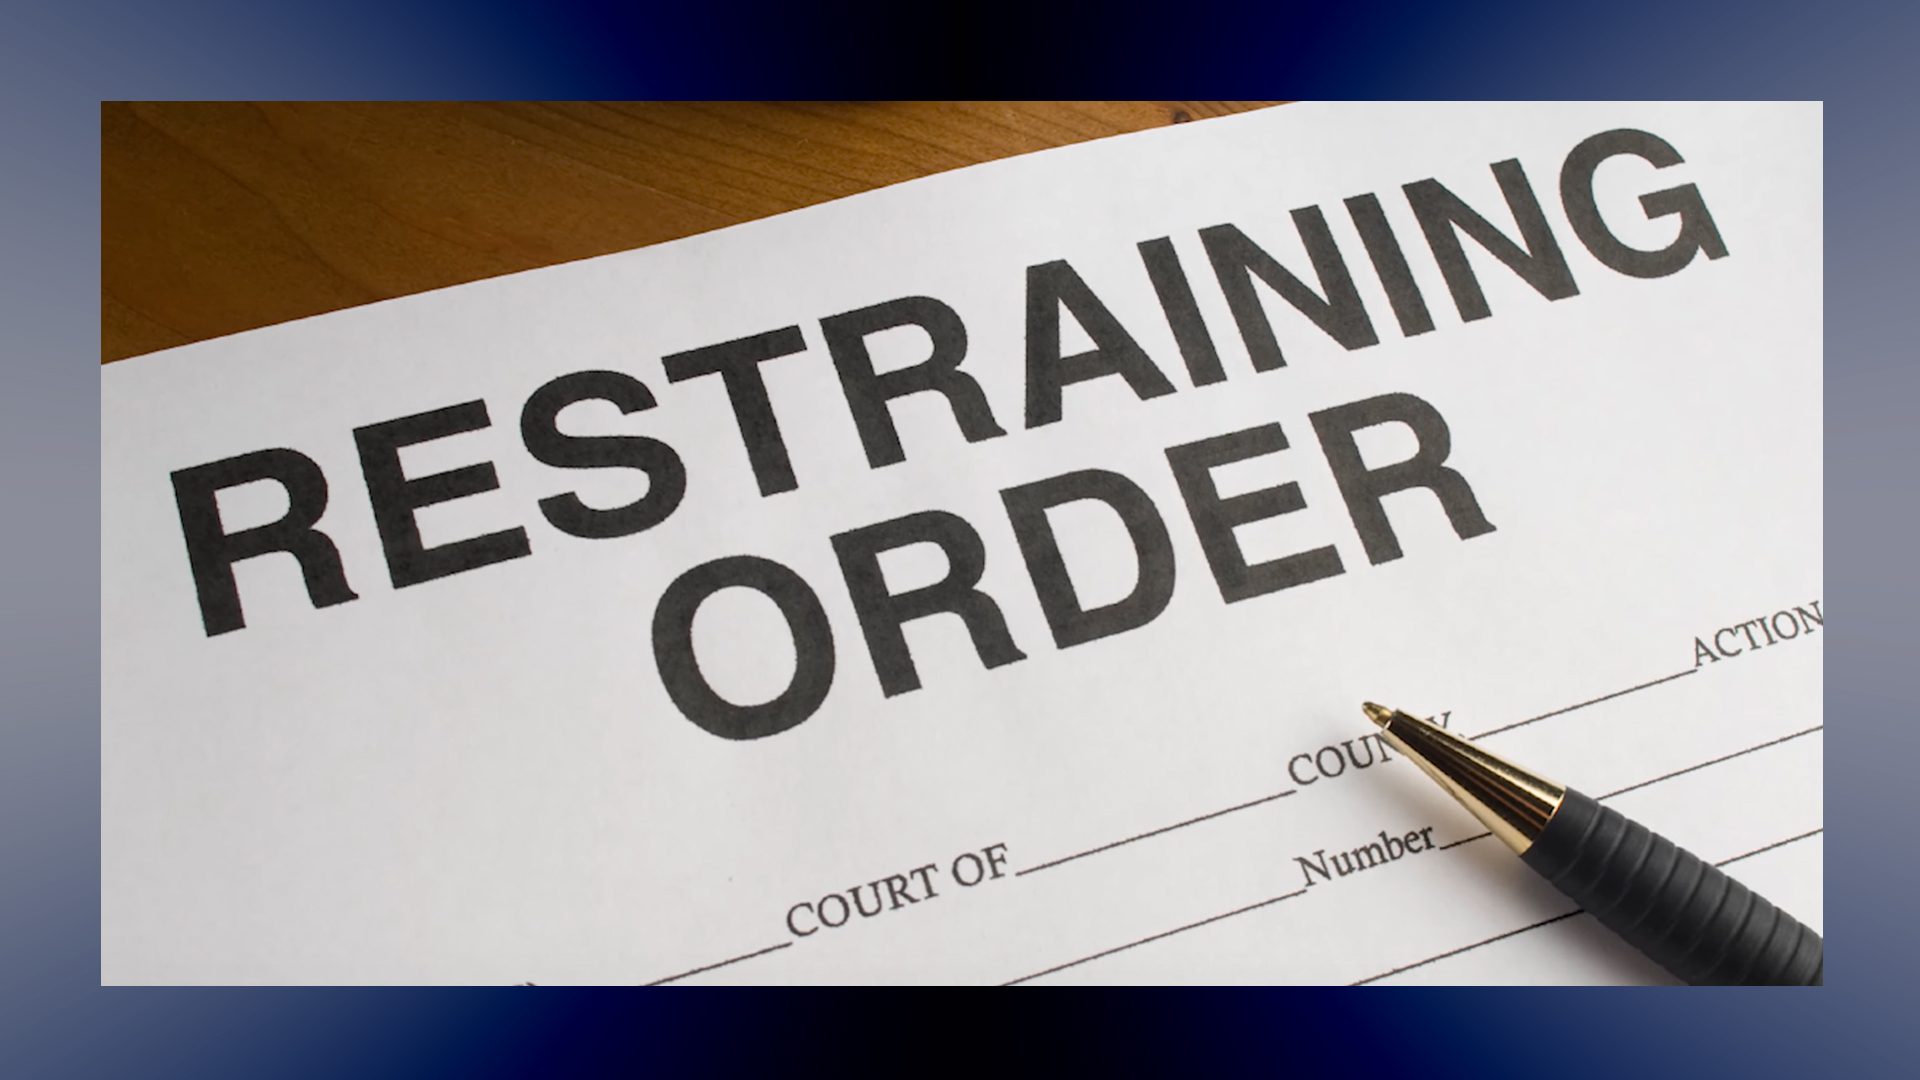 Temporary Restraining Order (TRO) How to Resolve & Get Reinstated on Amazon